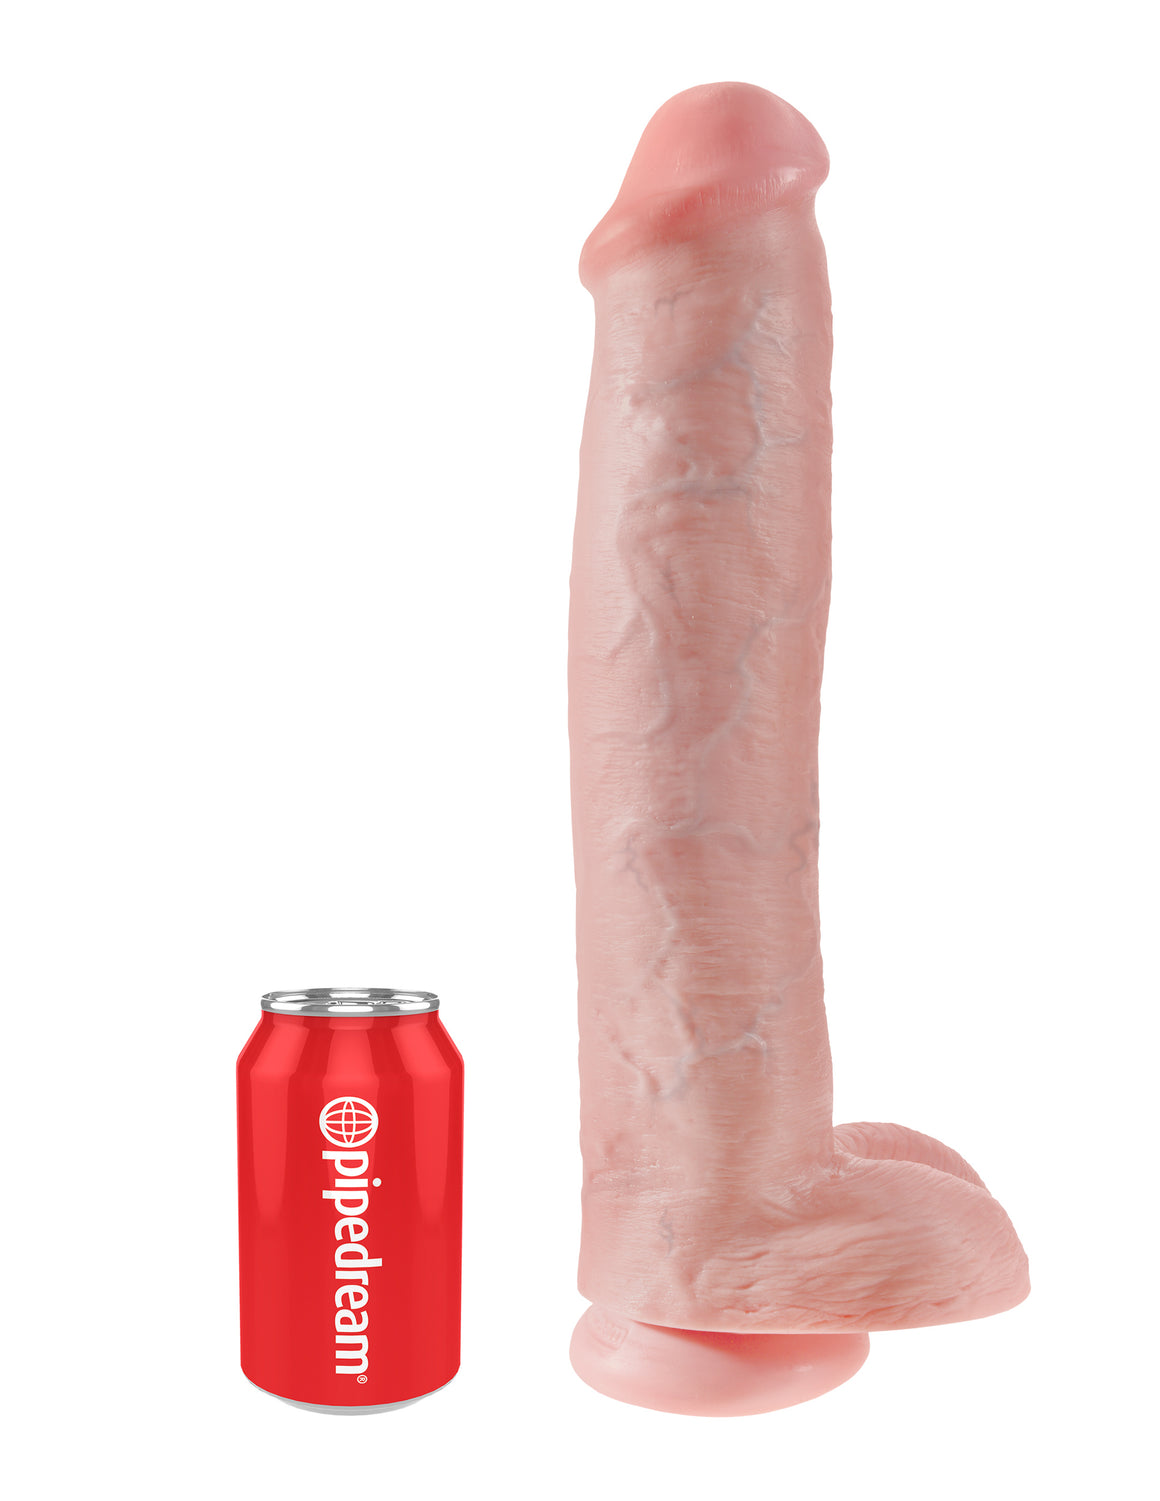 15" King Cock With Balls